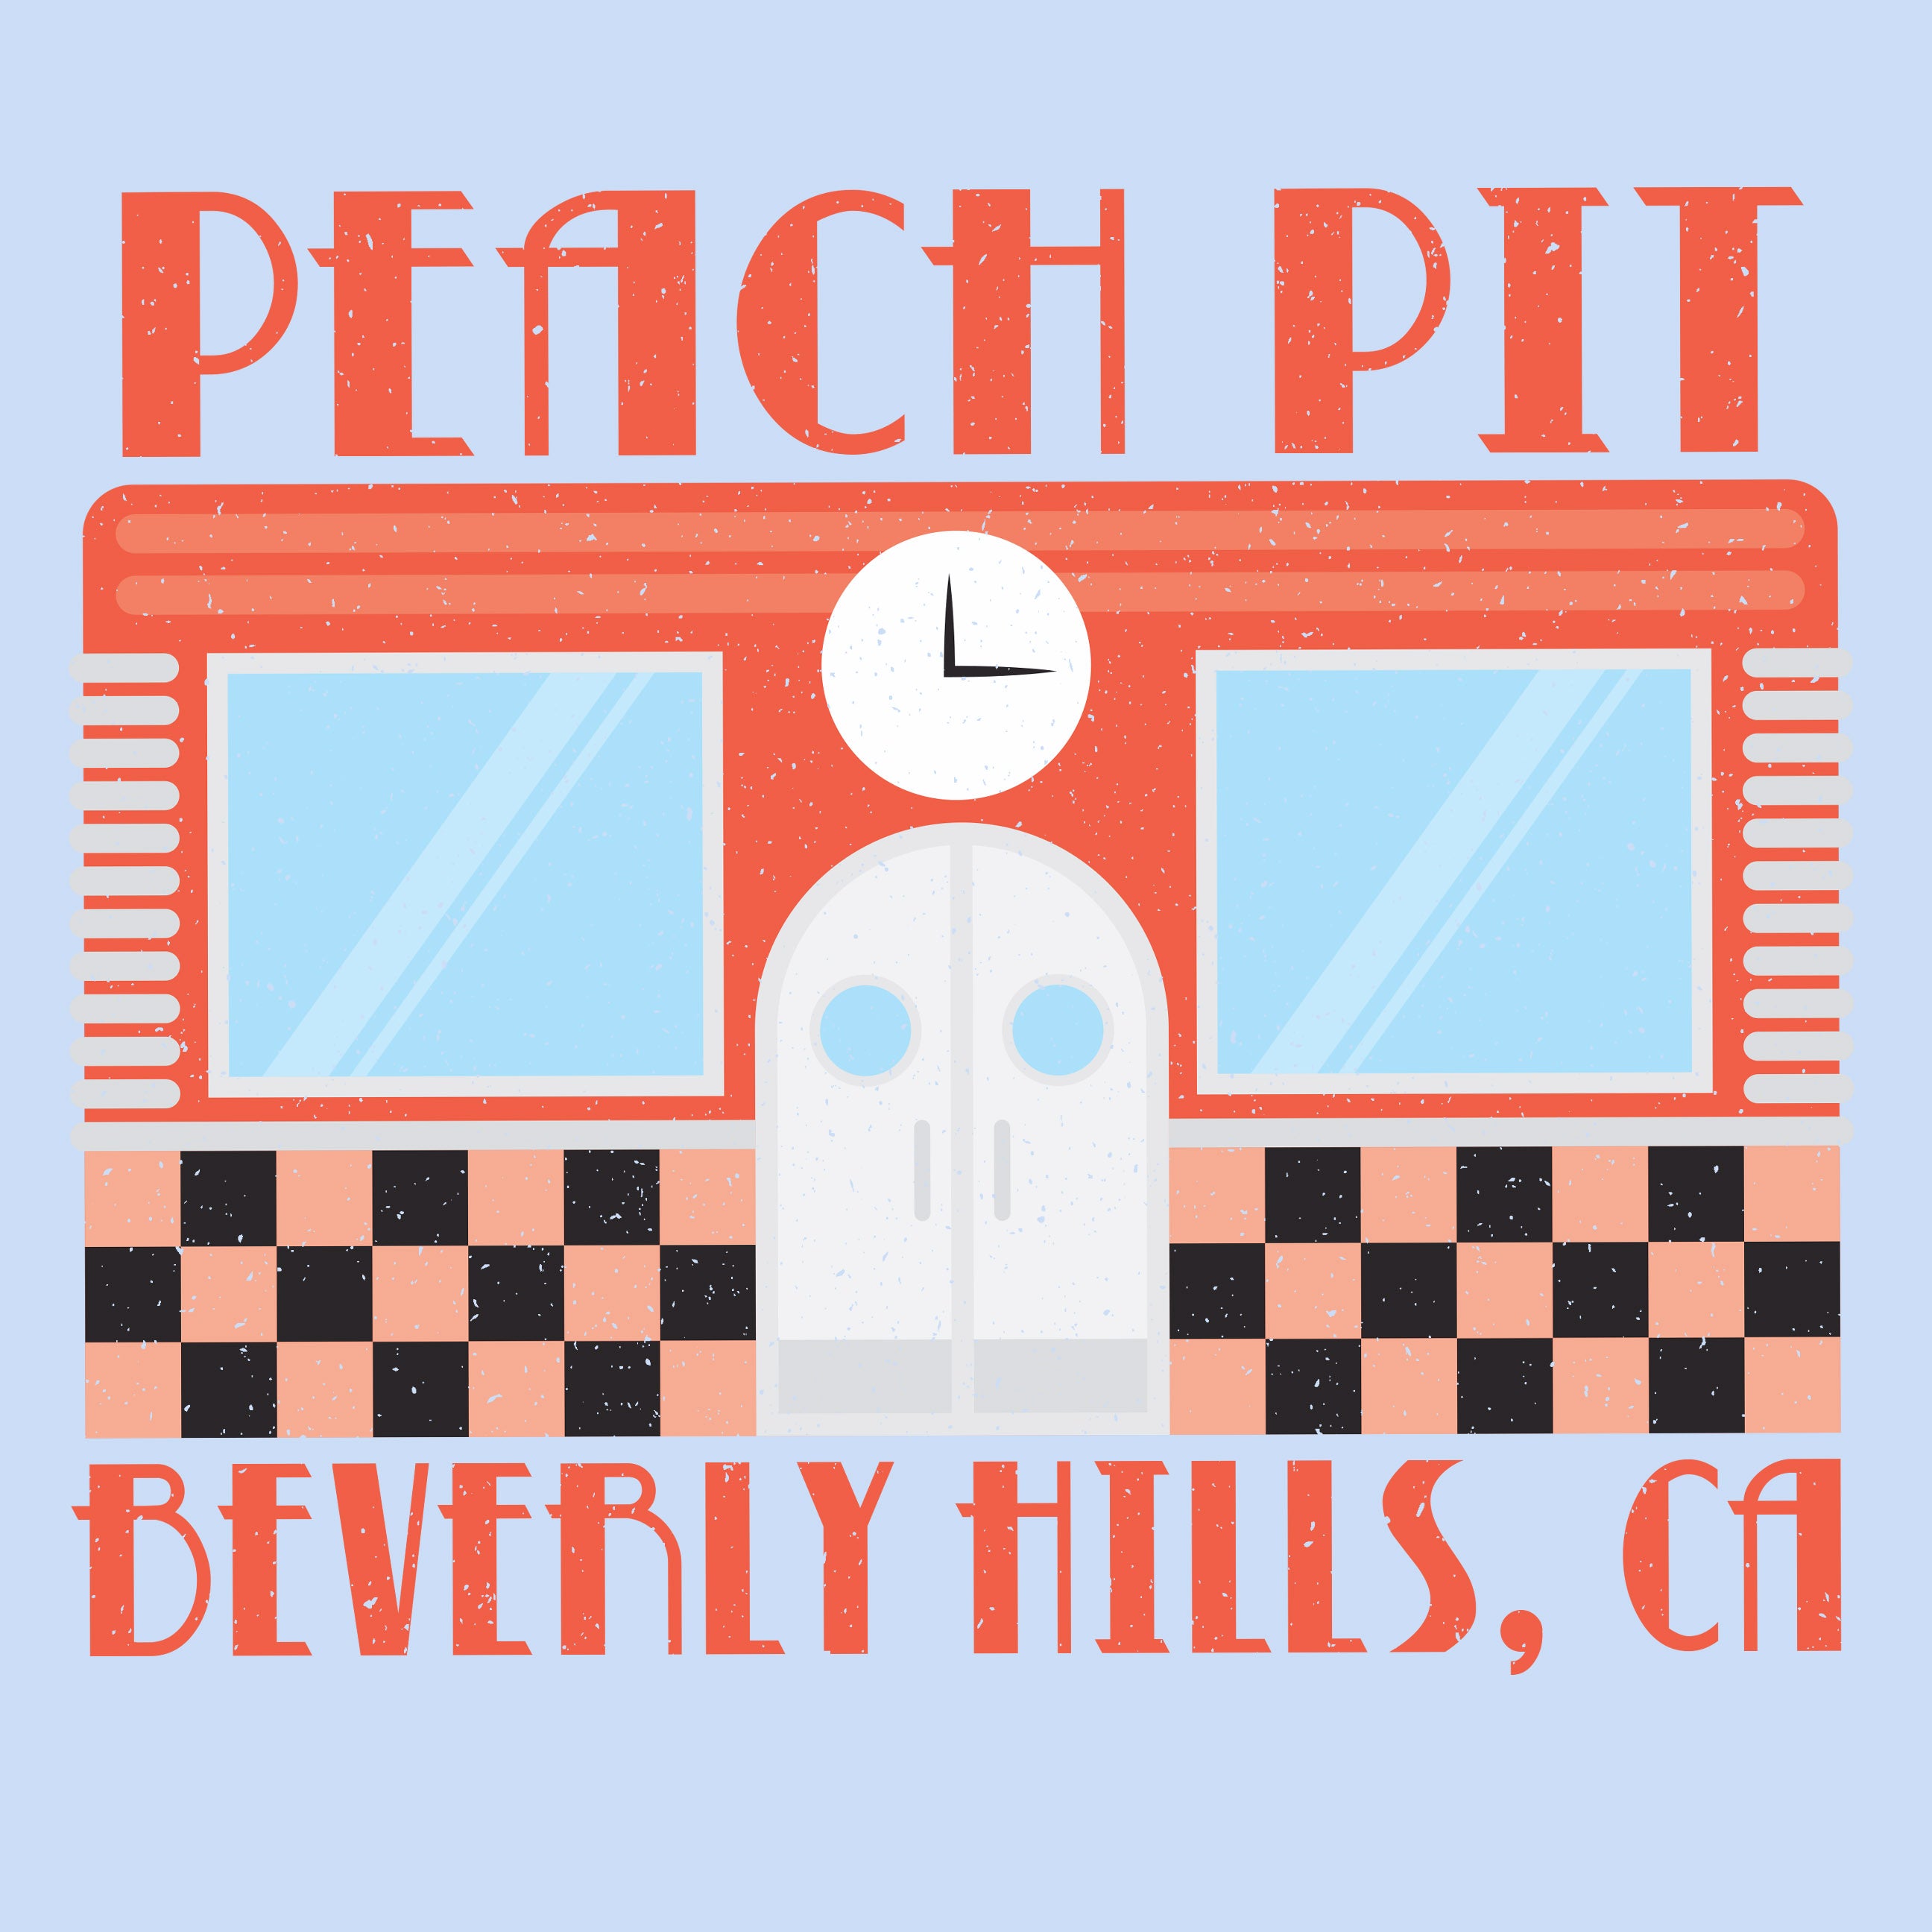 Peach Pit Beverly Hills Ca Tv Show Apparel Fluffy Crate Fluffycrate